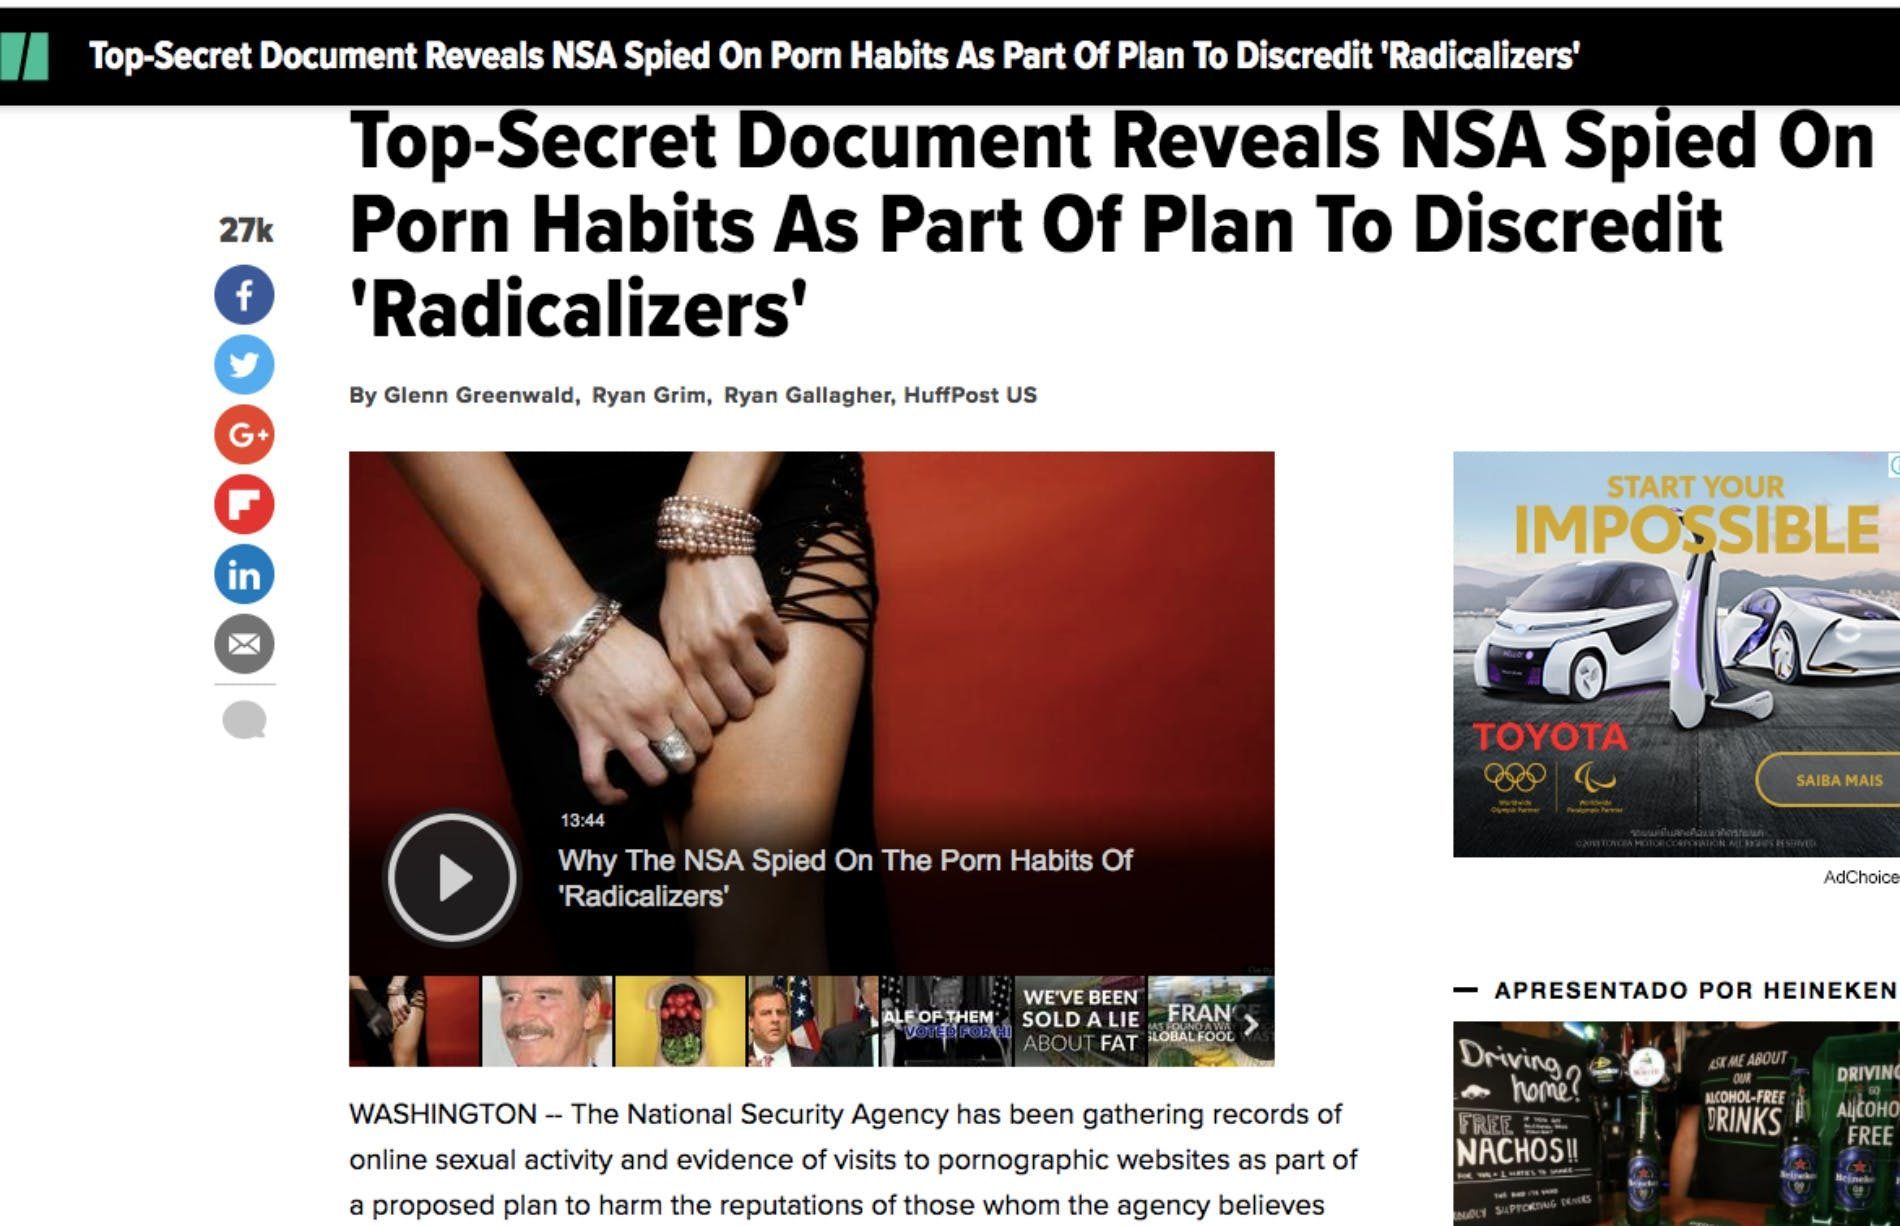 Nsa agent found with dick pics